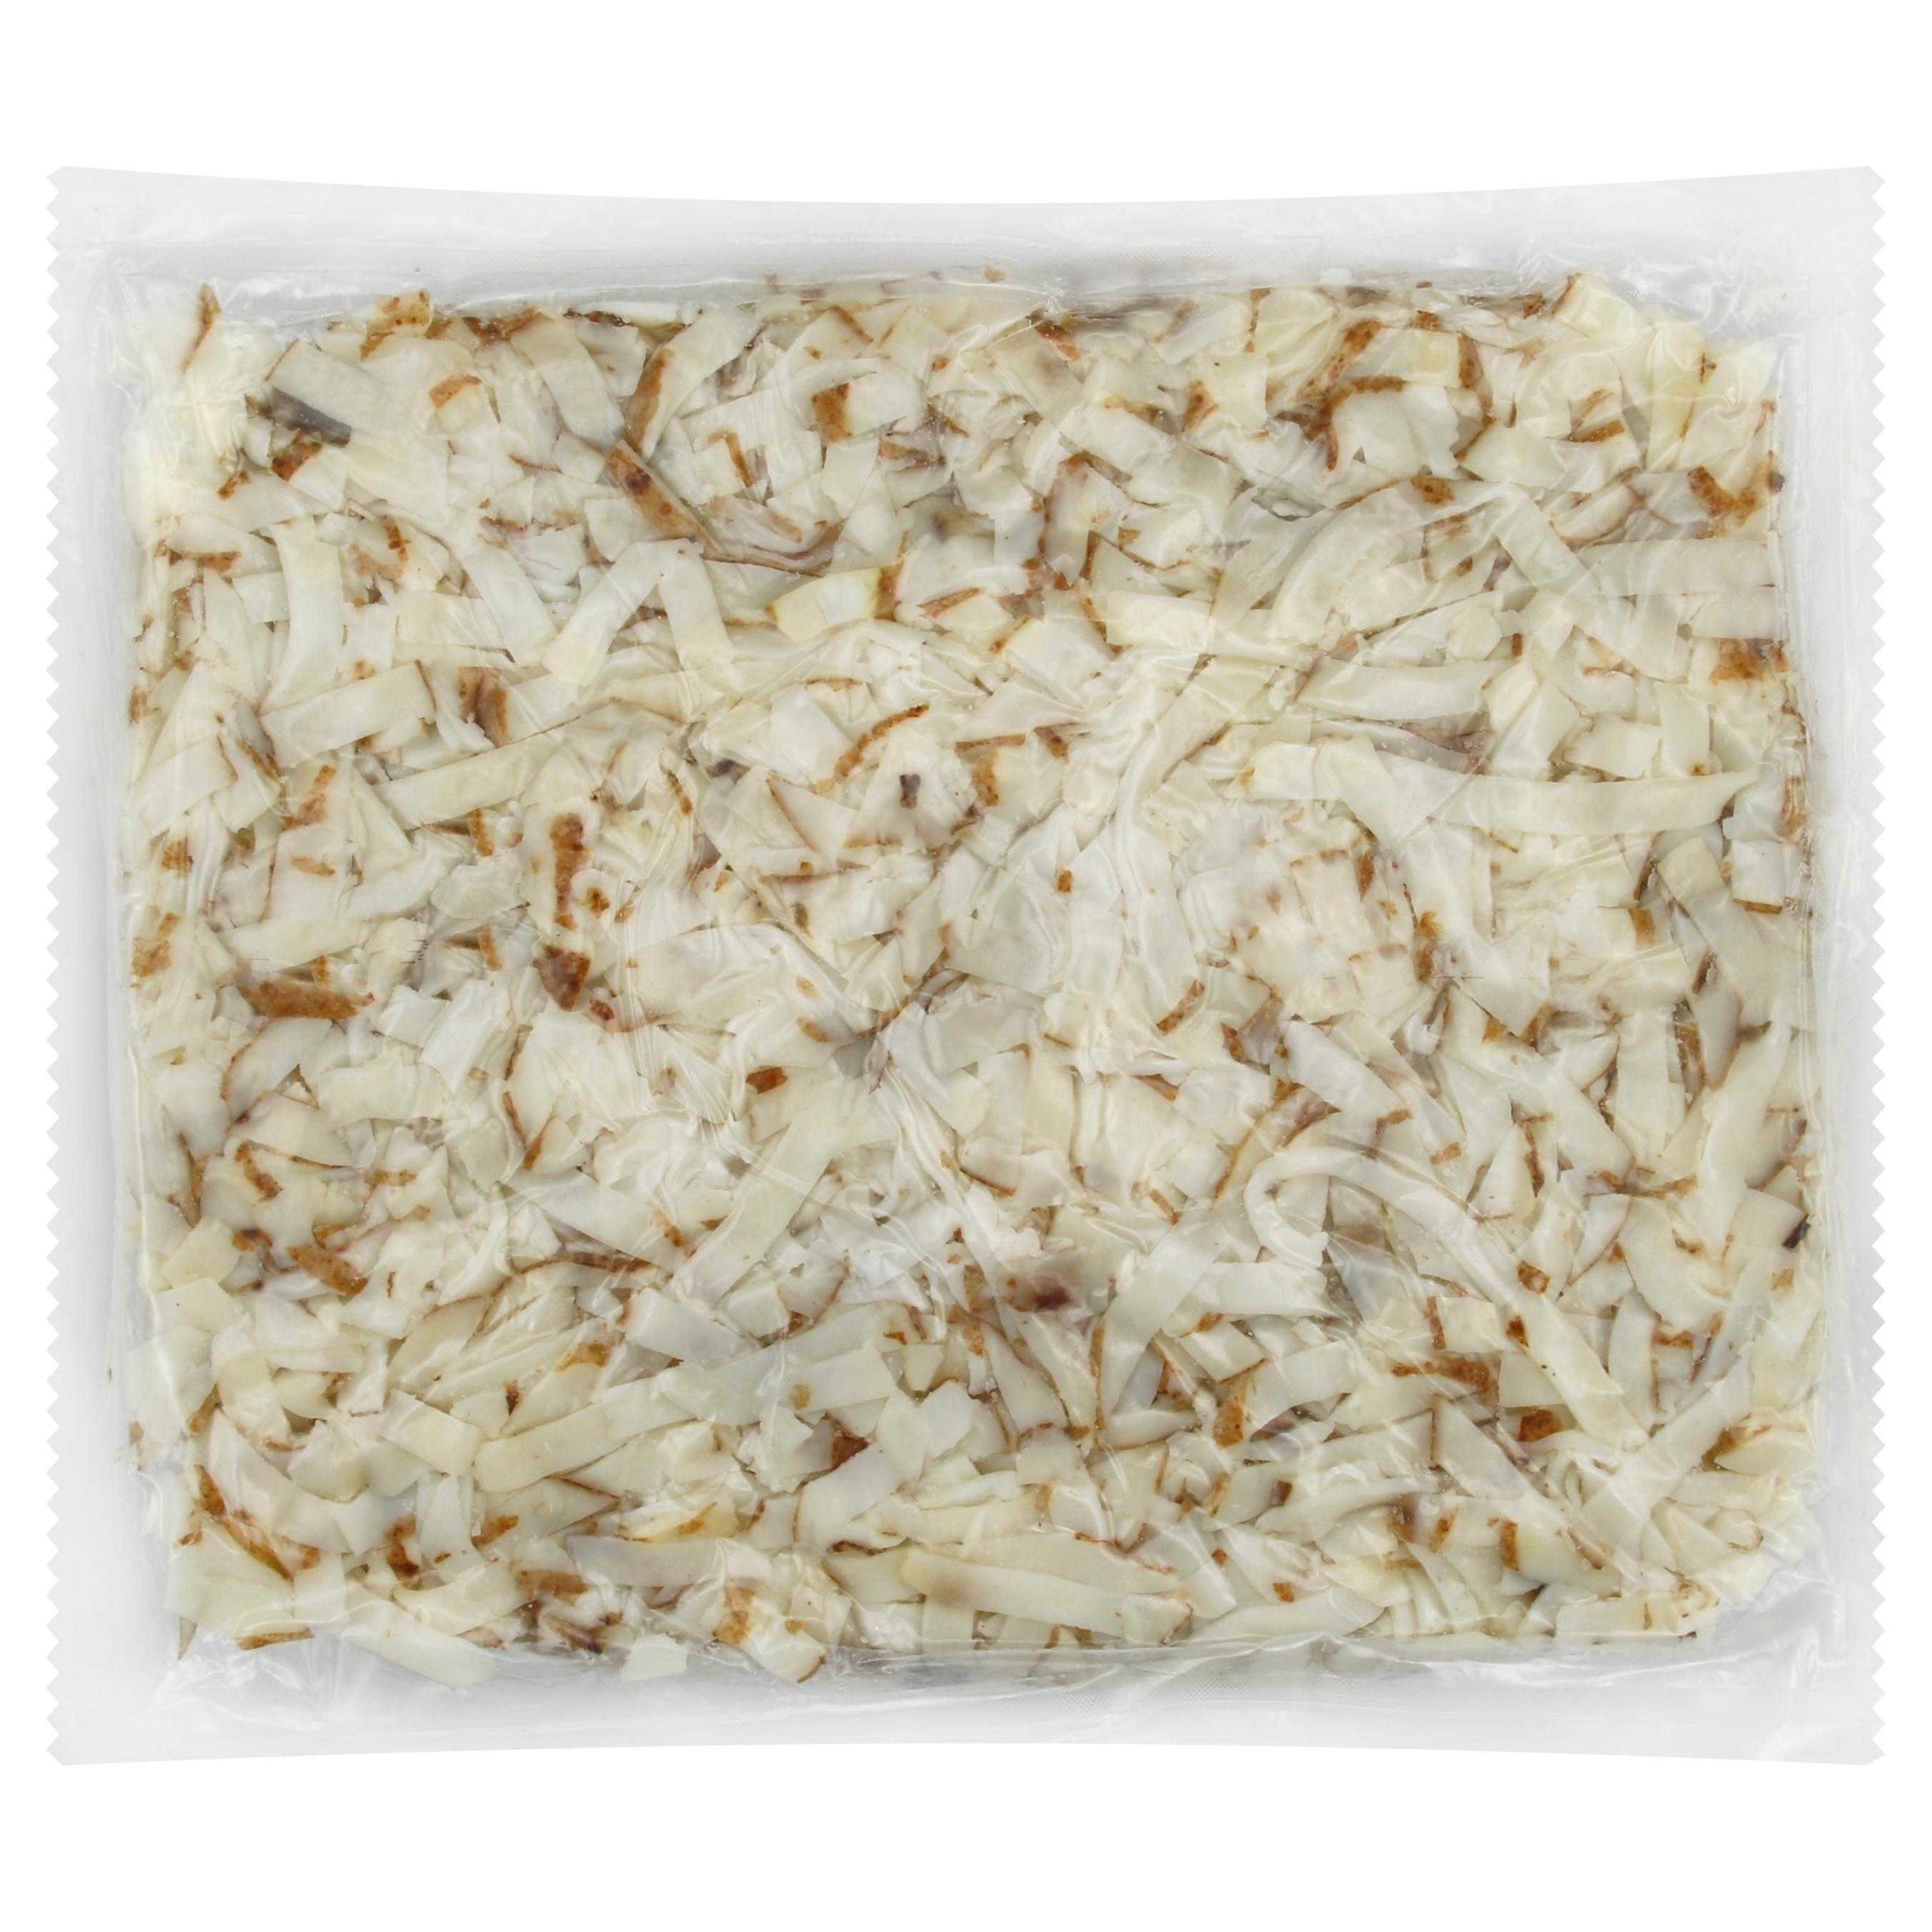 Simply Potatoes® Refrigerated Special Cut 3/8″ Wide Hash Browns made with Skin-on Russet Shredded 3/8″ wide, 2/10 Lb Bags